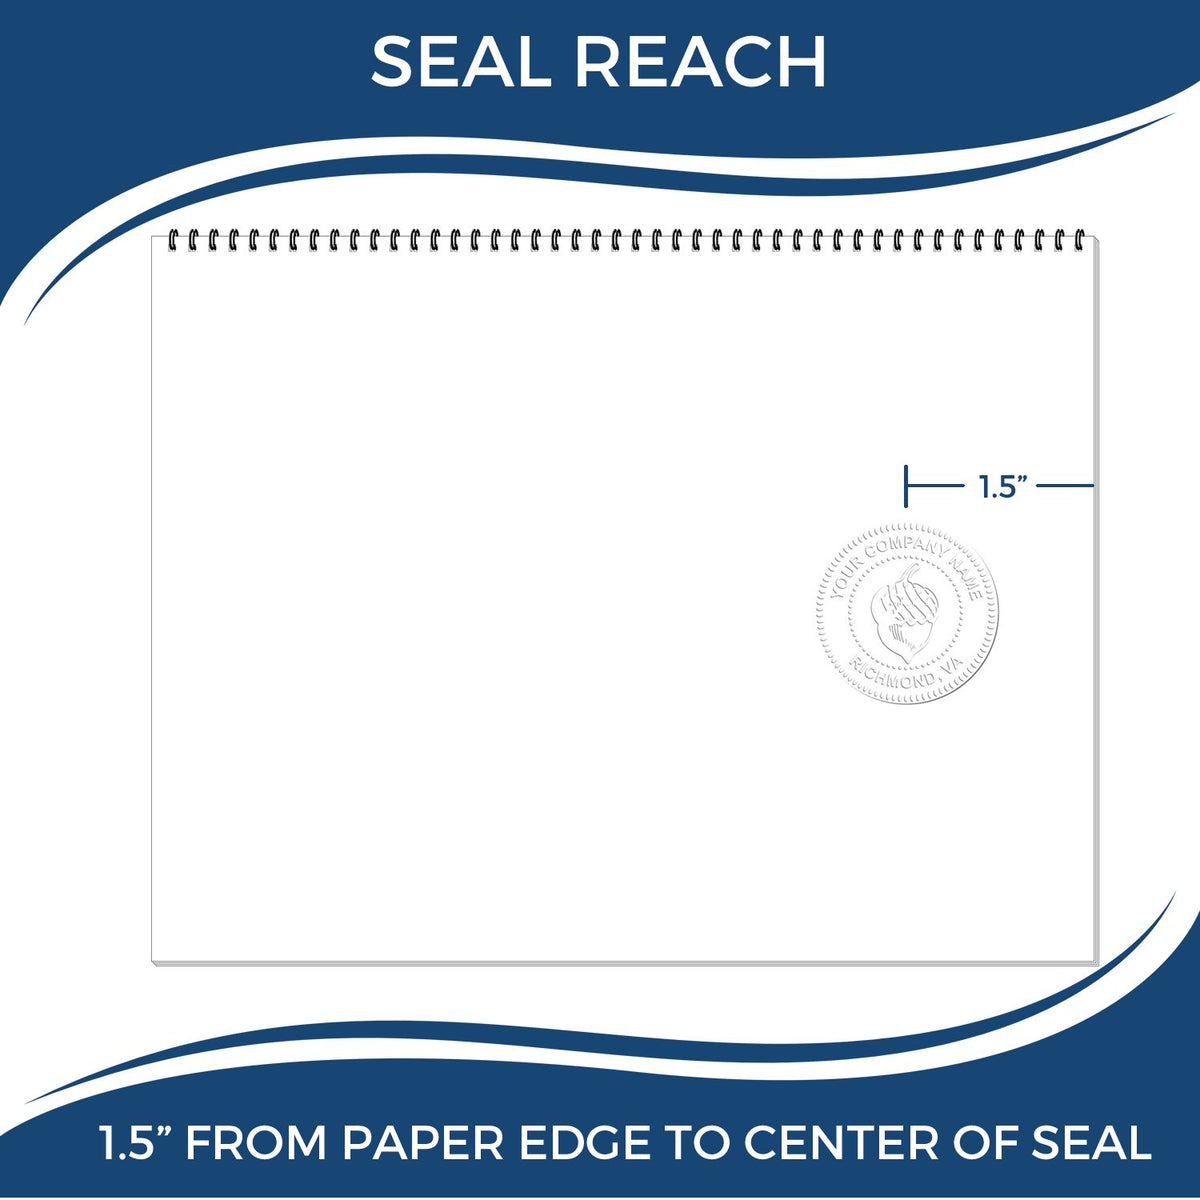 An infographic showing the seal reach which is represented by a ruler and a miniature seal image of the Gift Kansas Geologist Seal